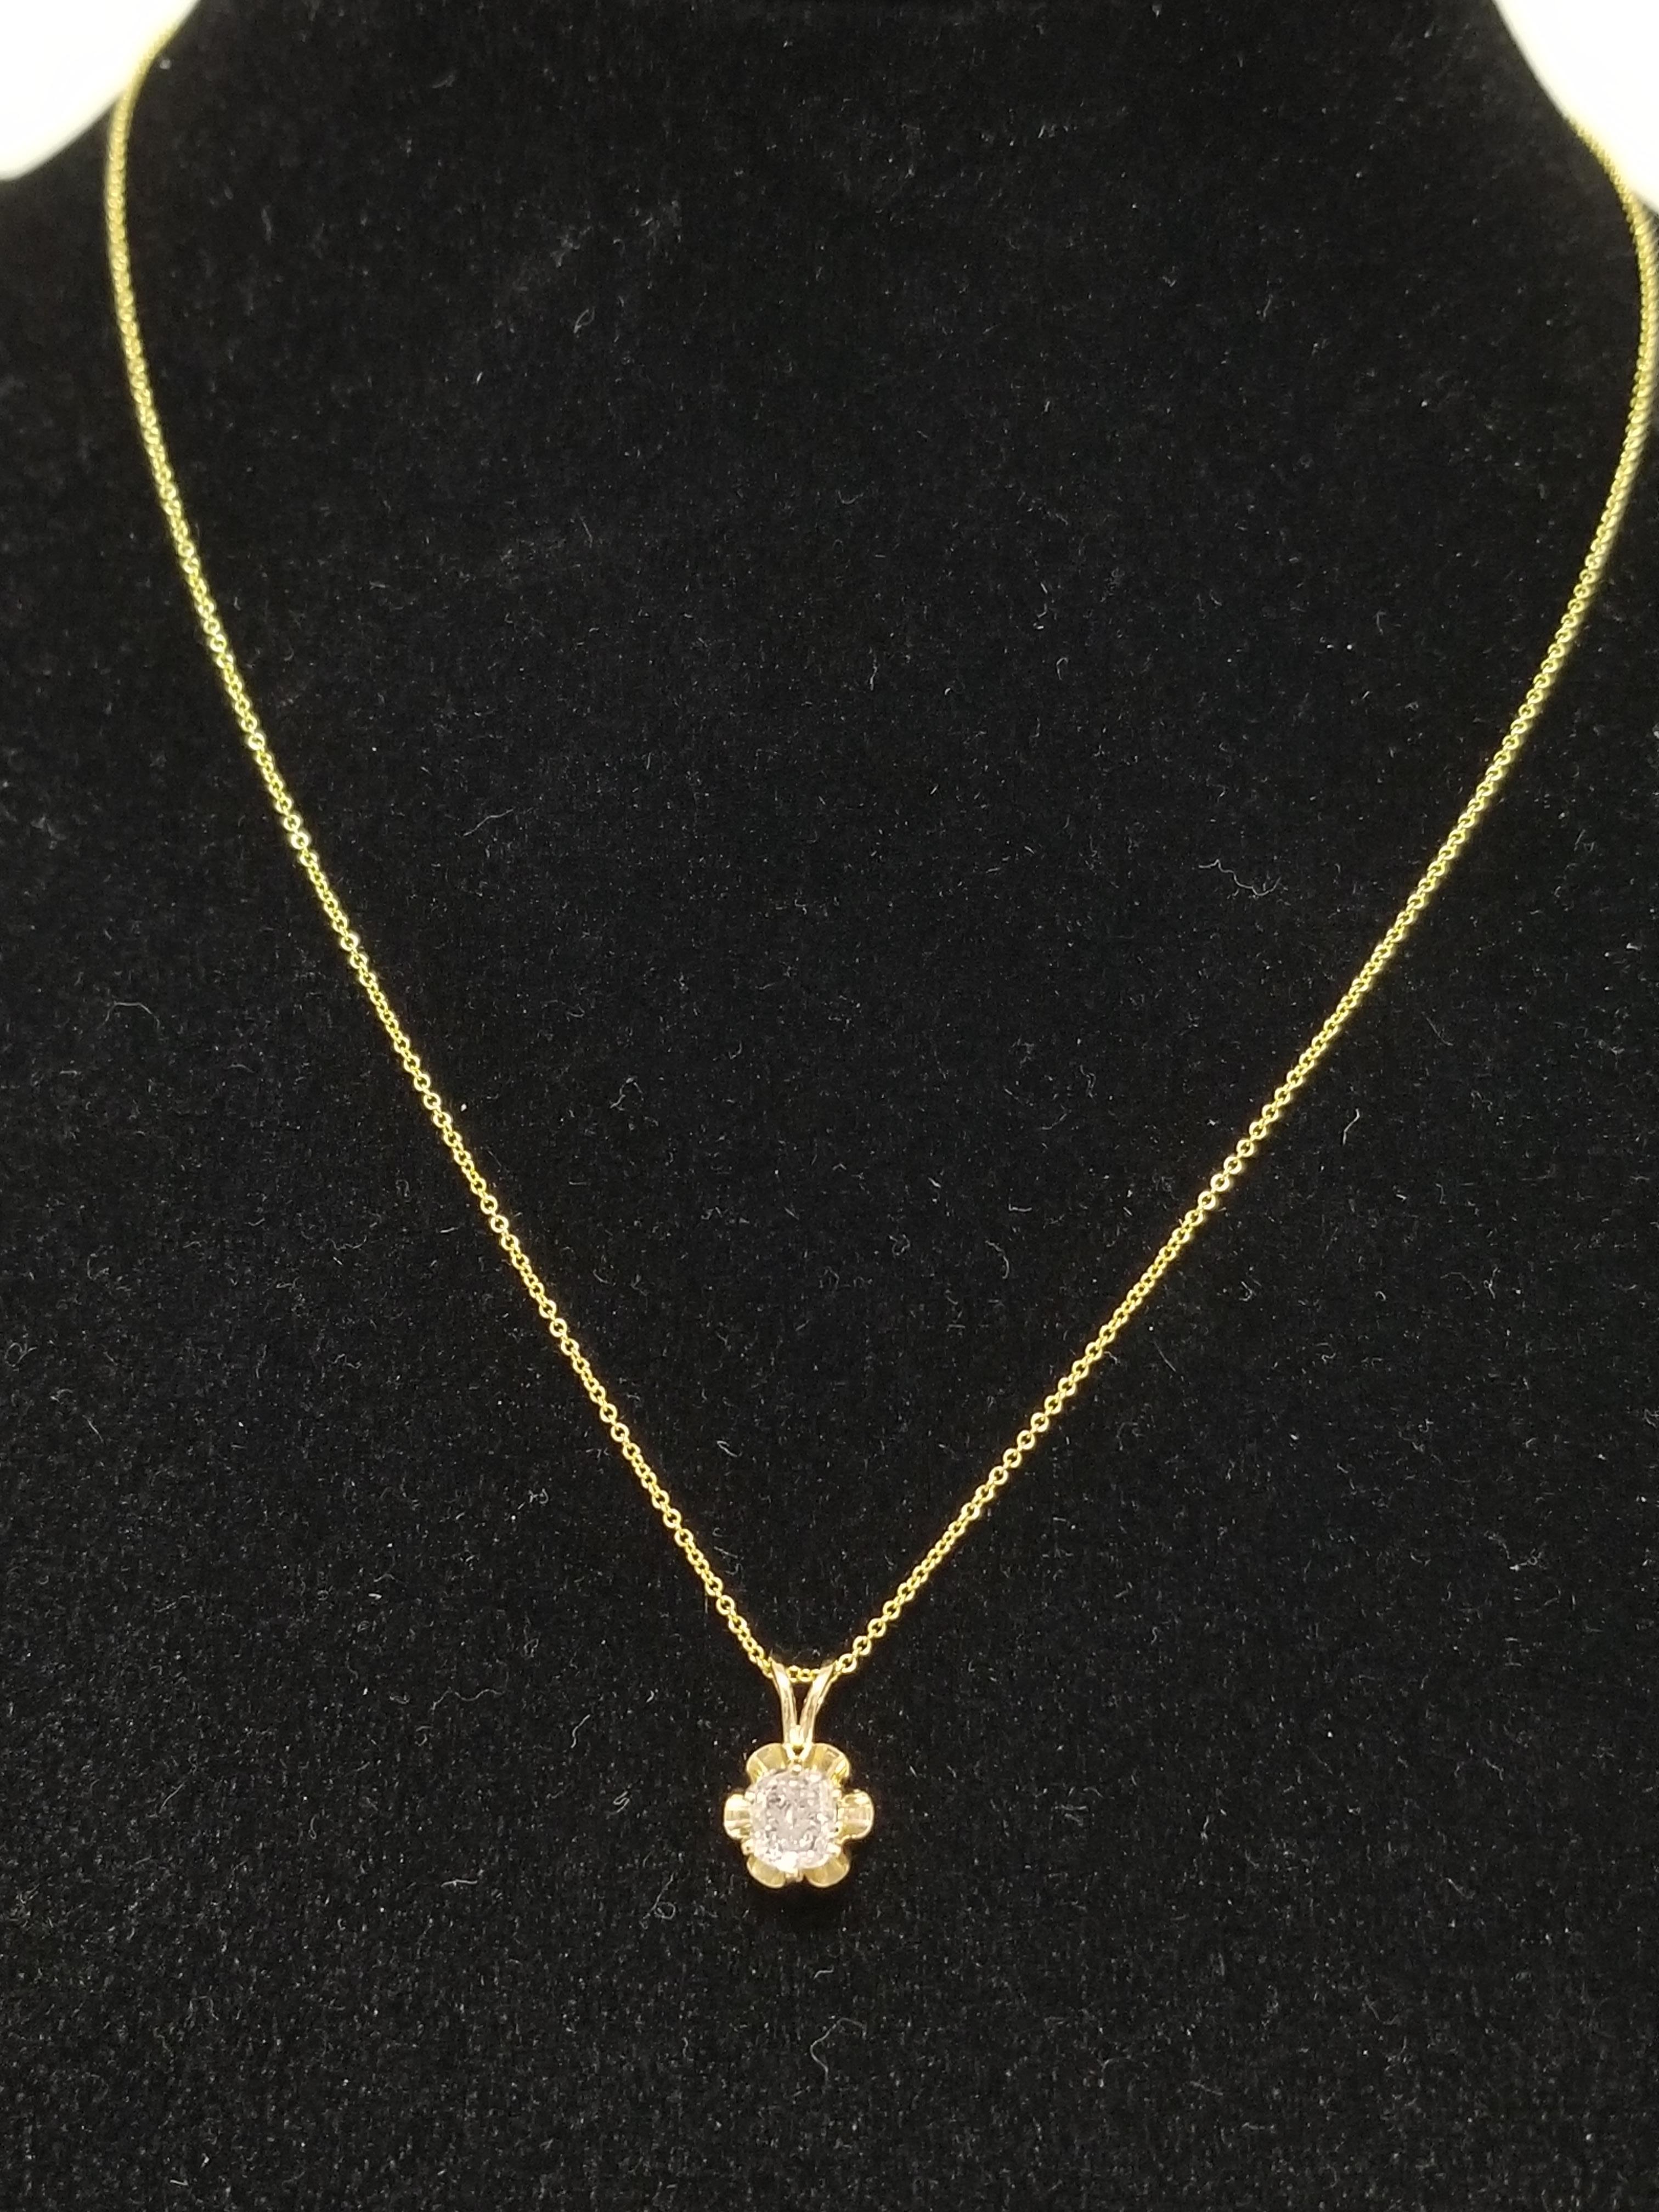 This gorgeous diamond pendant features a 0.53 carat GIA pink cushion diamond solitaire set in a beautiful 14 karat yellow gold buttercup design. Pendant measures approximately 0.5 inch length and 0.25 inch wide. 

(Pendant Only-Chain sold